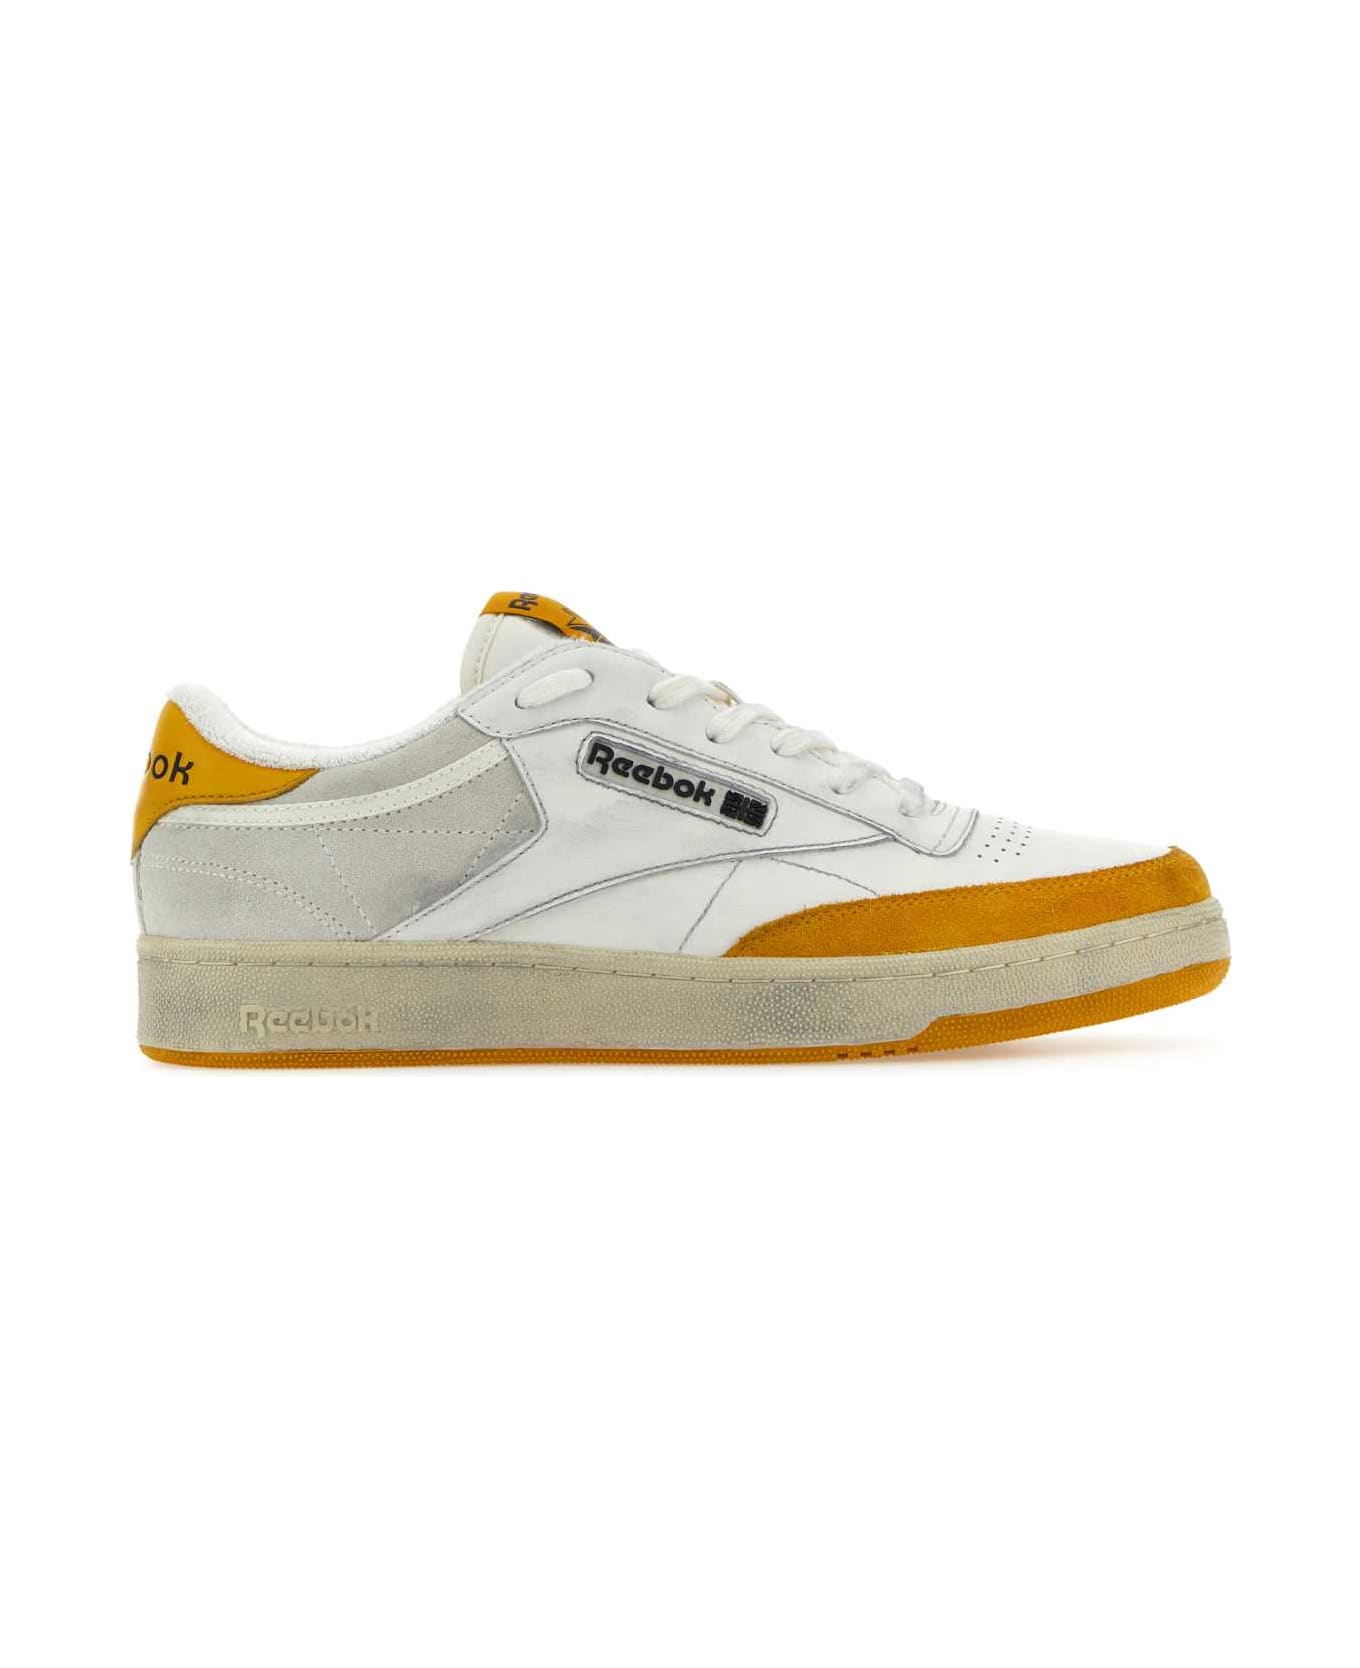 Reebok Two-tone Leather And Suede Club C Sneakers - WHITEORAN